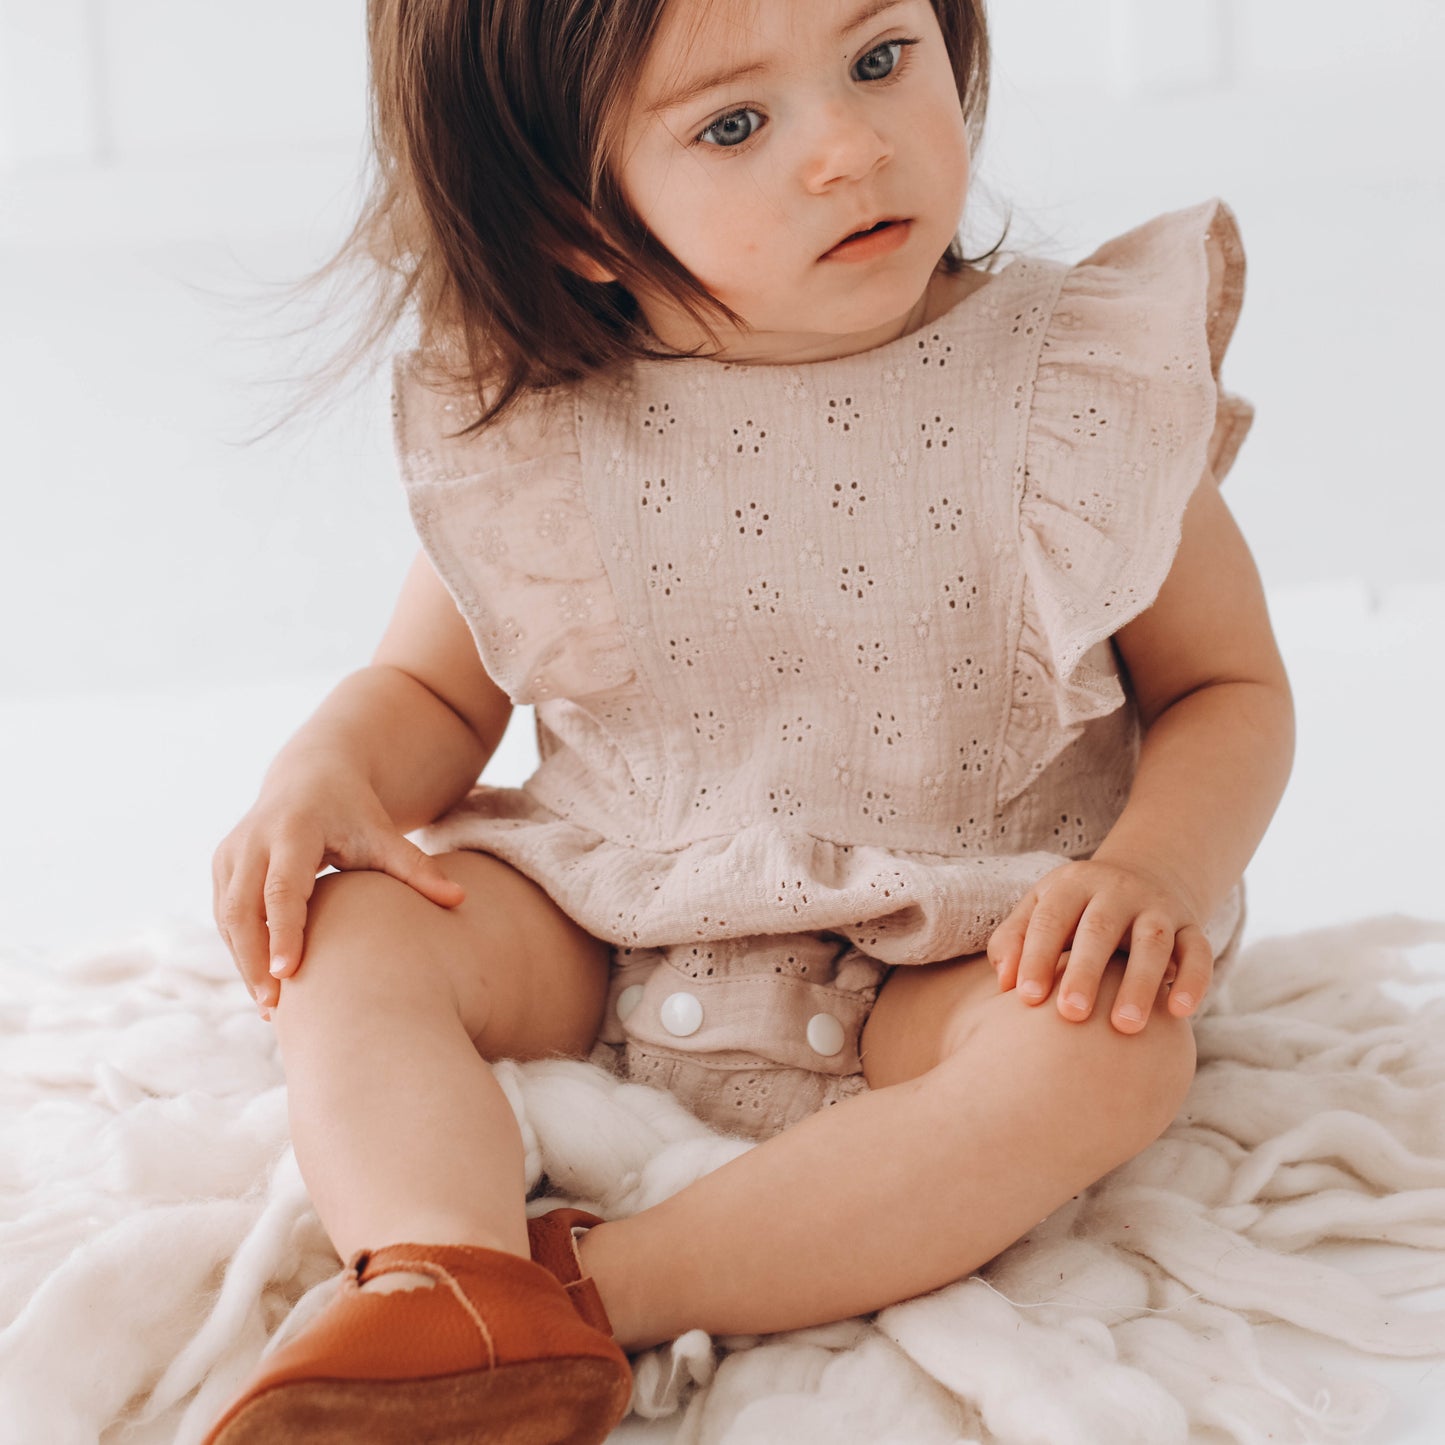 Embroidered muslin romper with frills